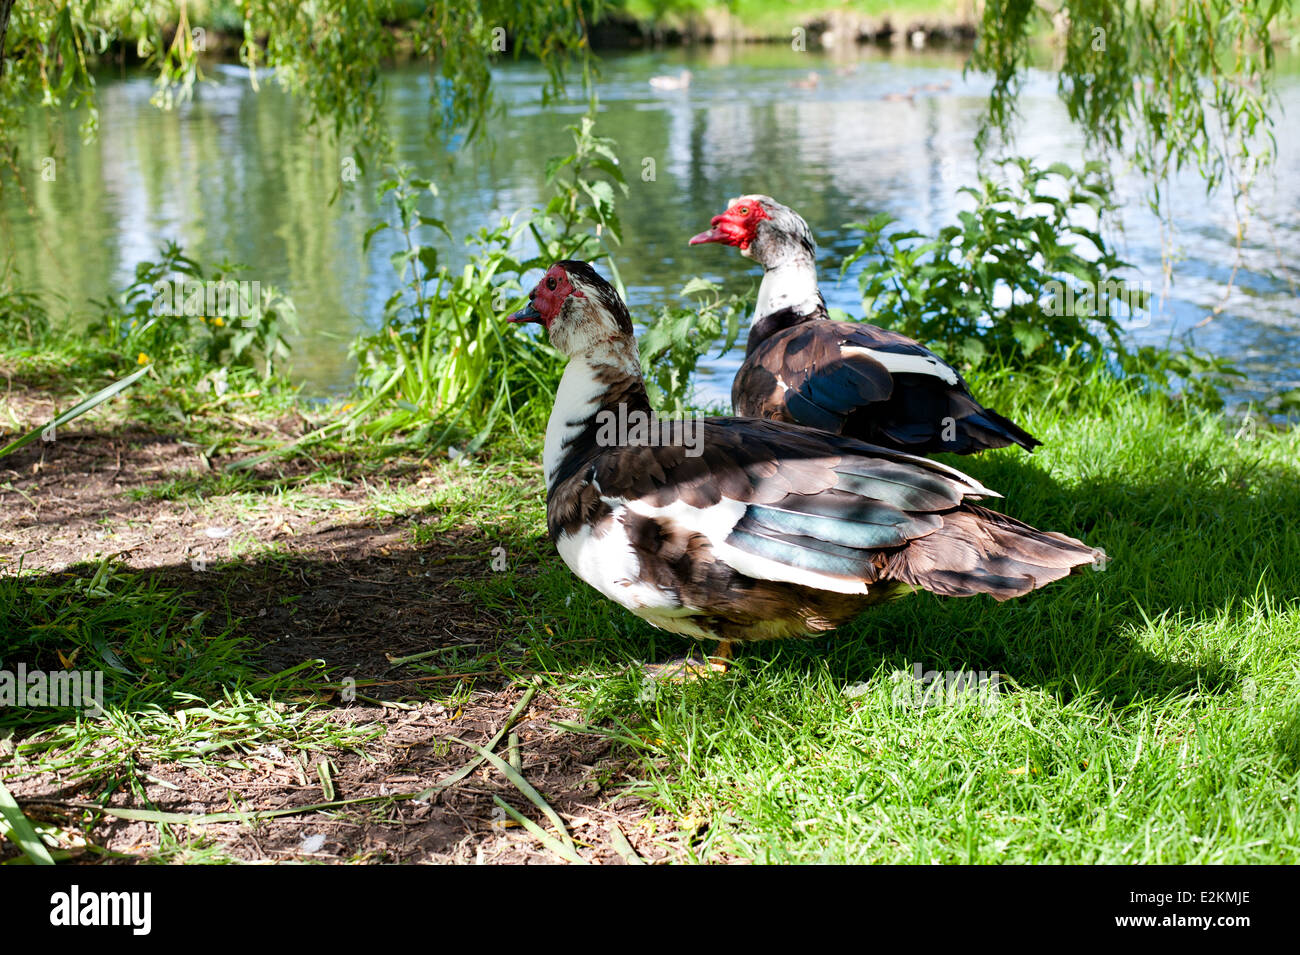 The Muscovy duck walking on the green grass.Lat name Cairina moschata Stock Photo